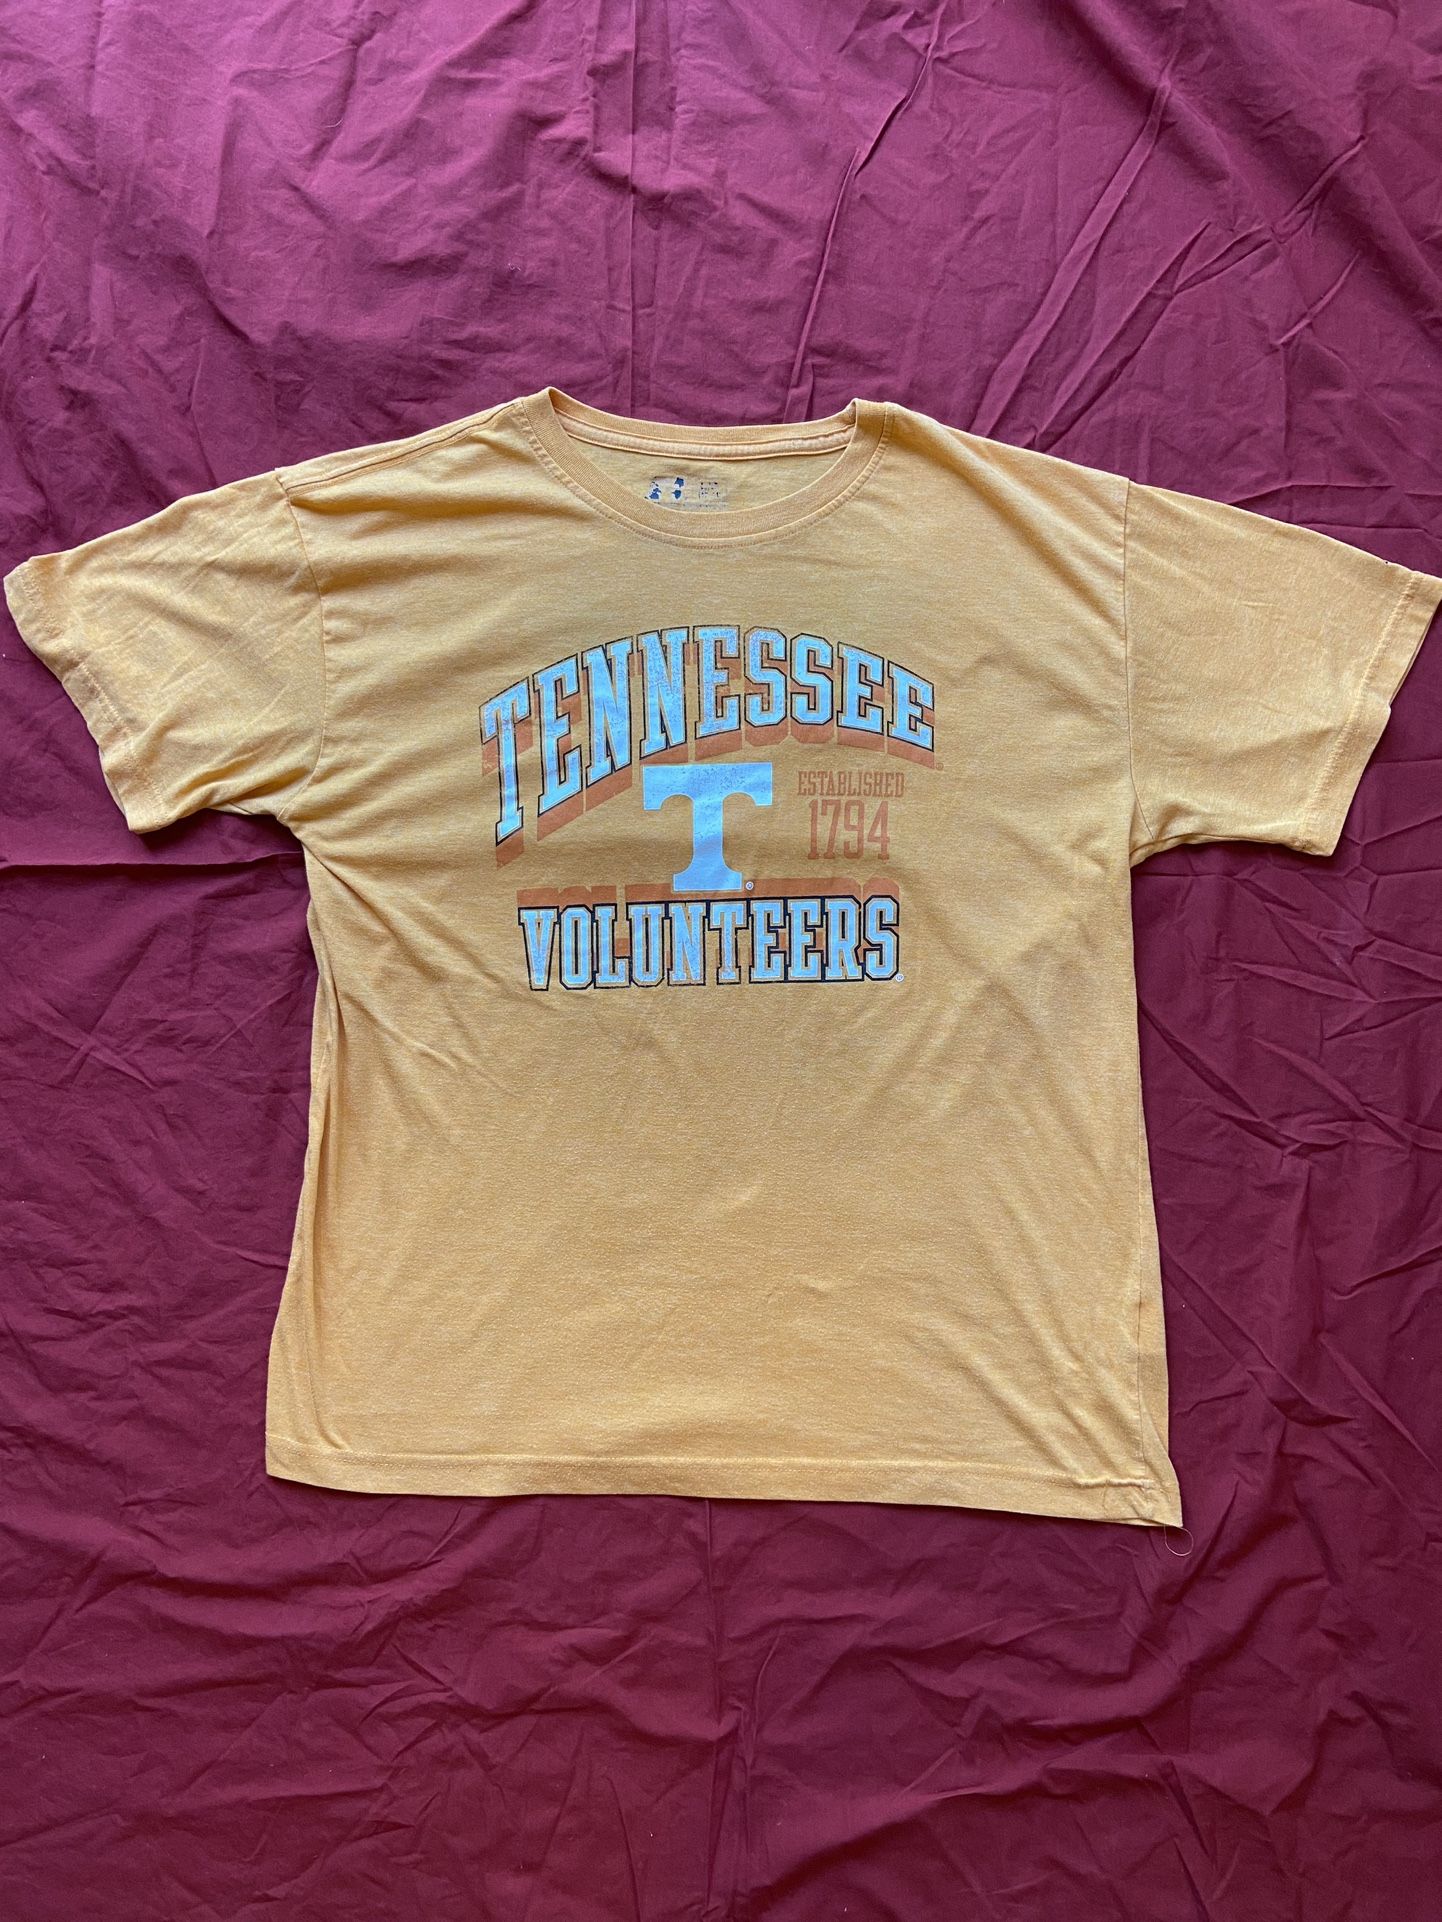 Men's Tennessee Volunteers T-Shirt Russell Size Large Orange